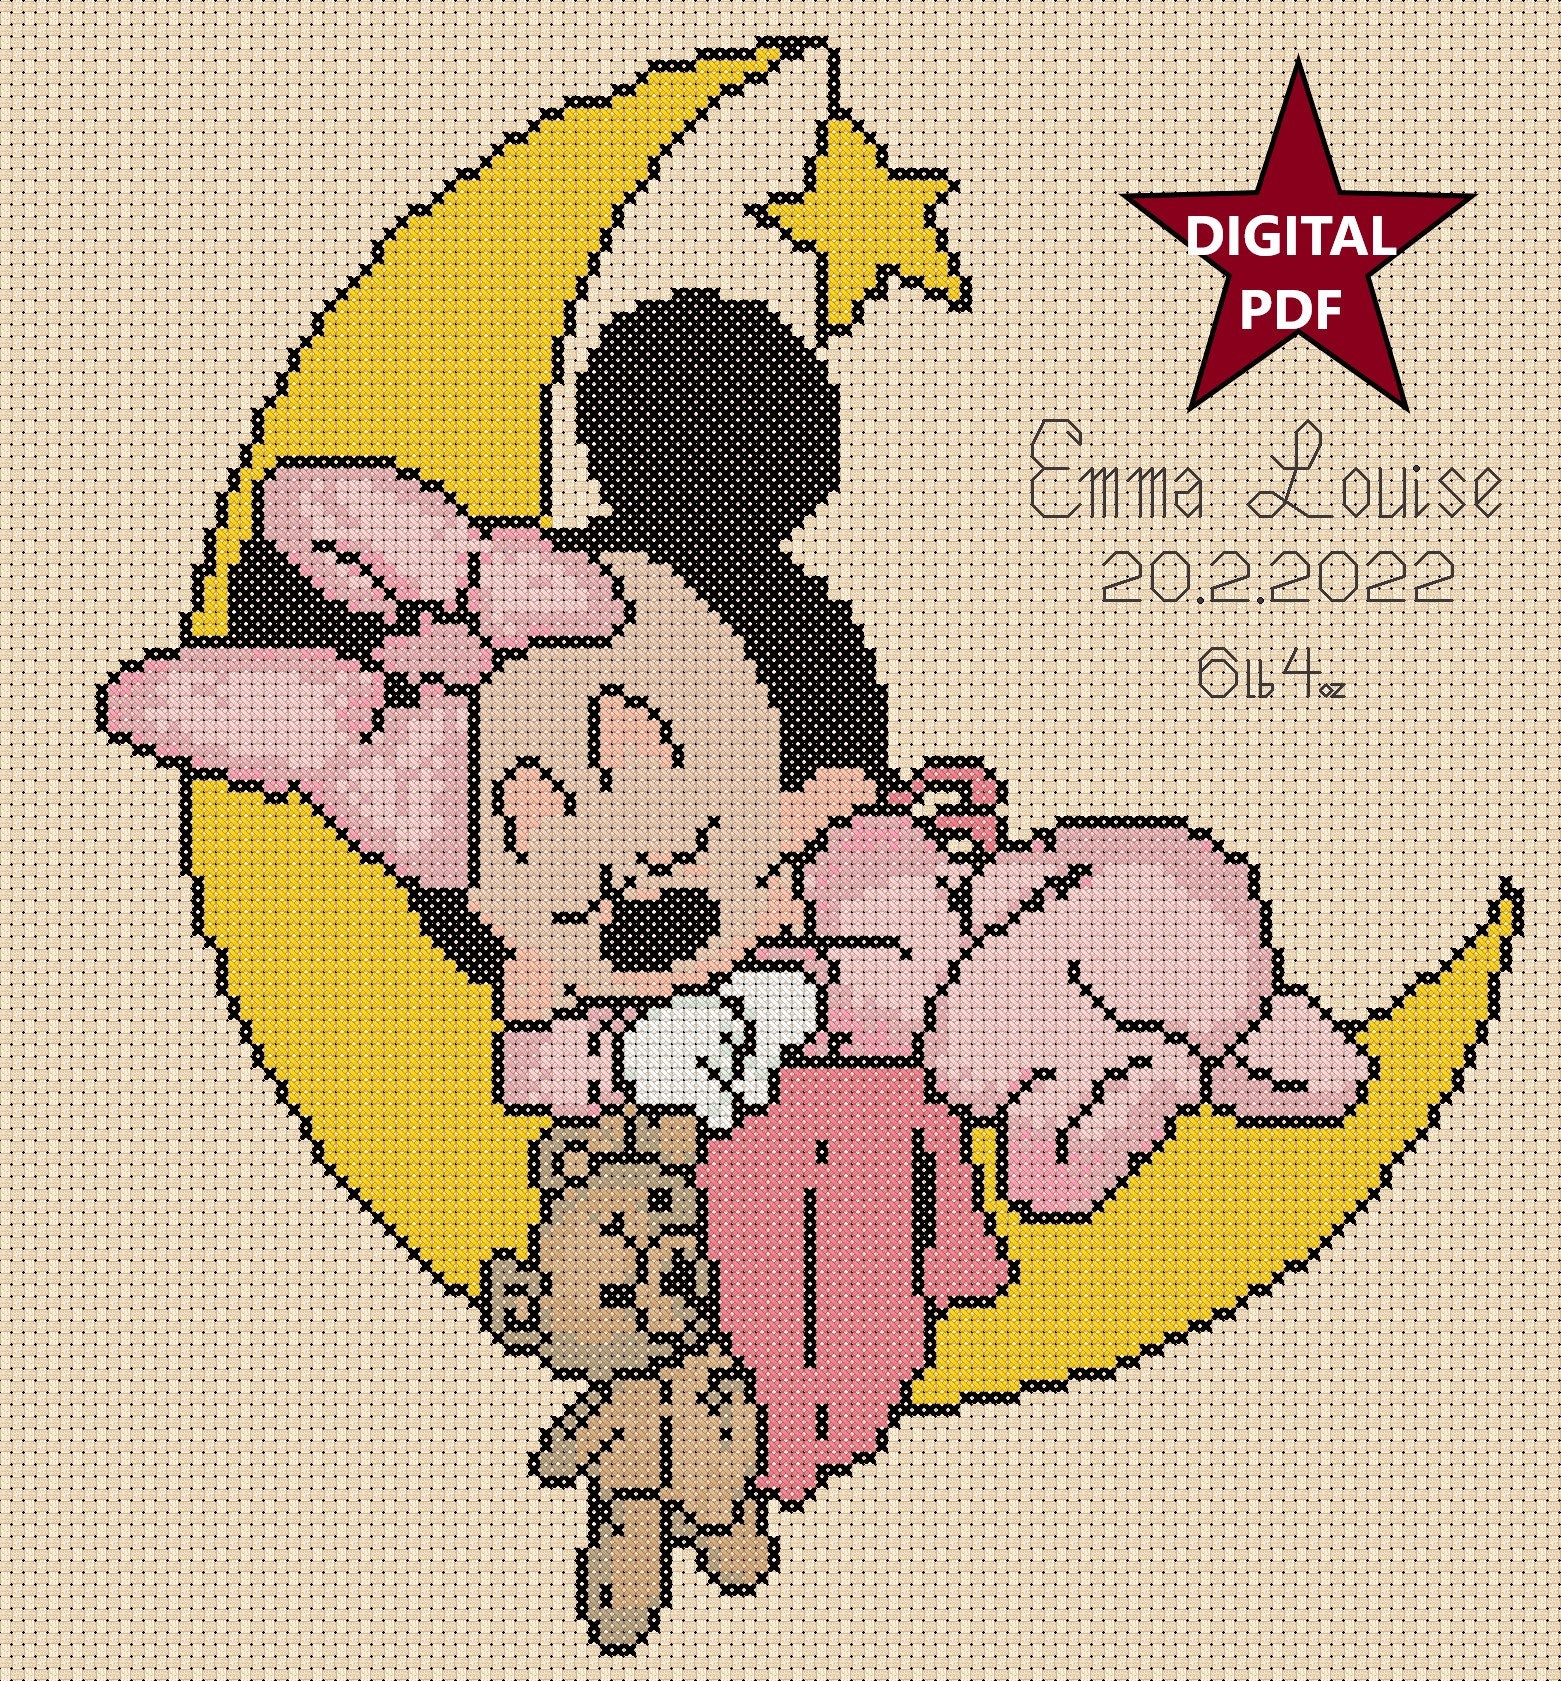  Disney Babies Minnie Mouse SHHH! Counted Cross Stitch Kit 32003  : Everything Else